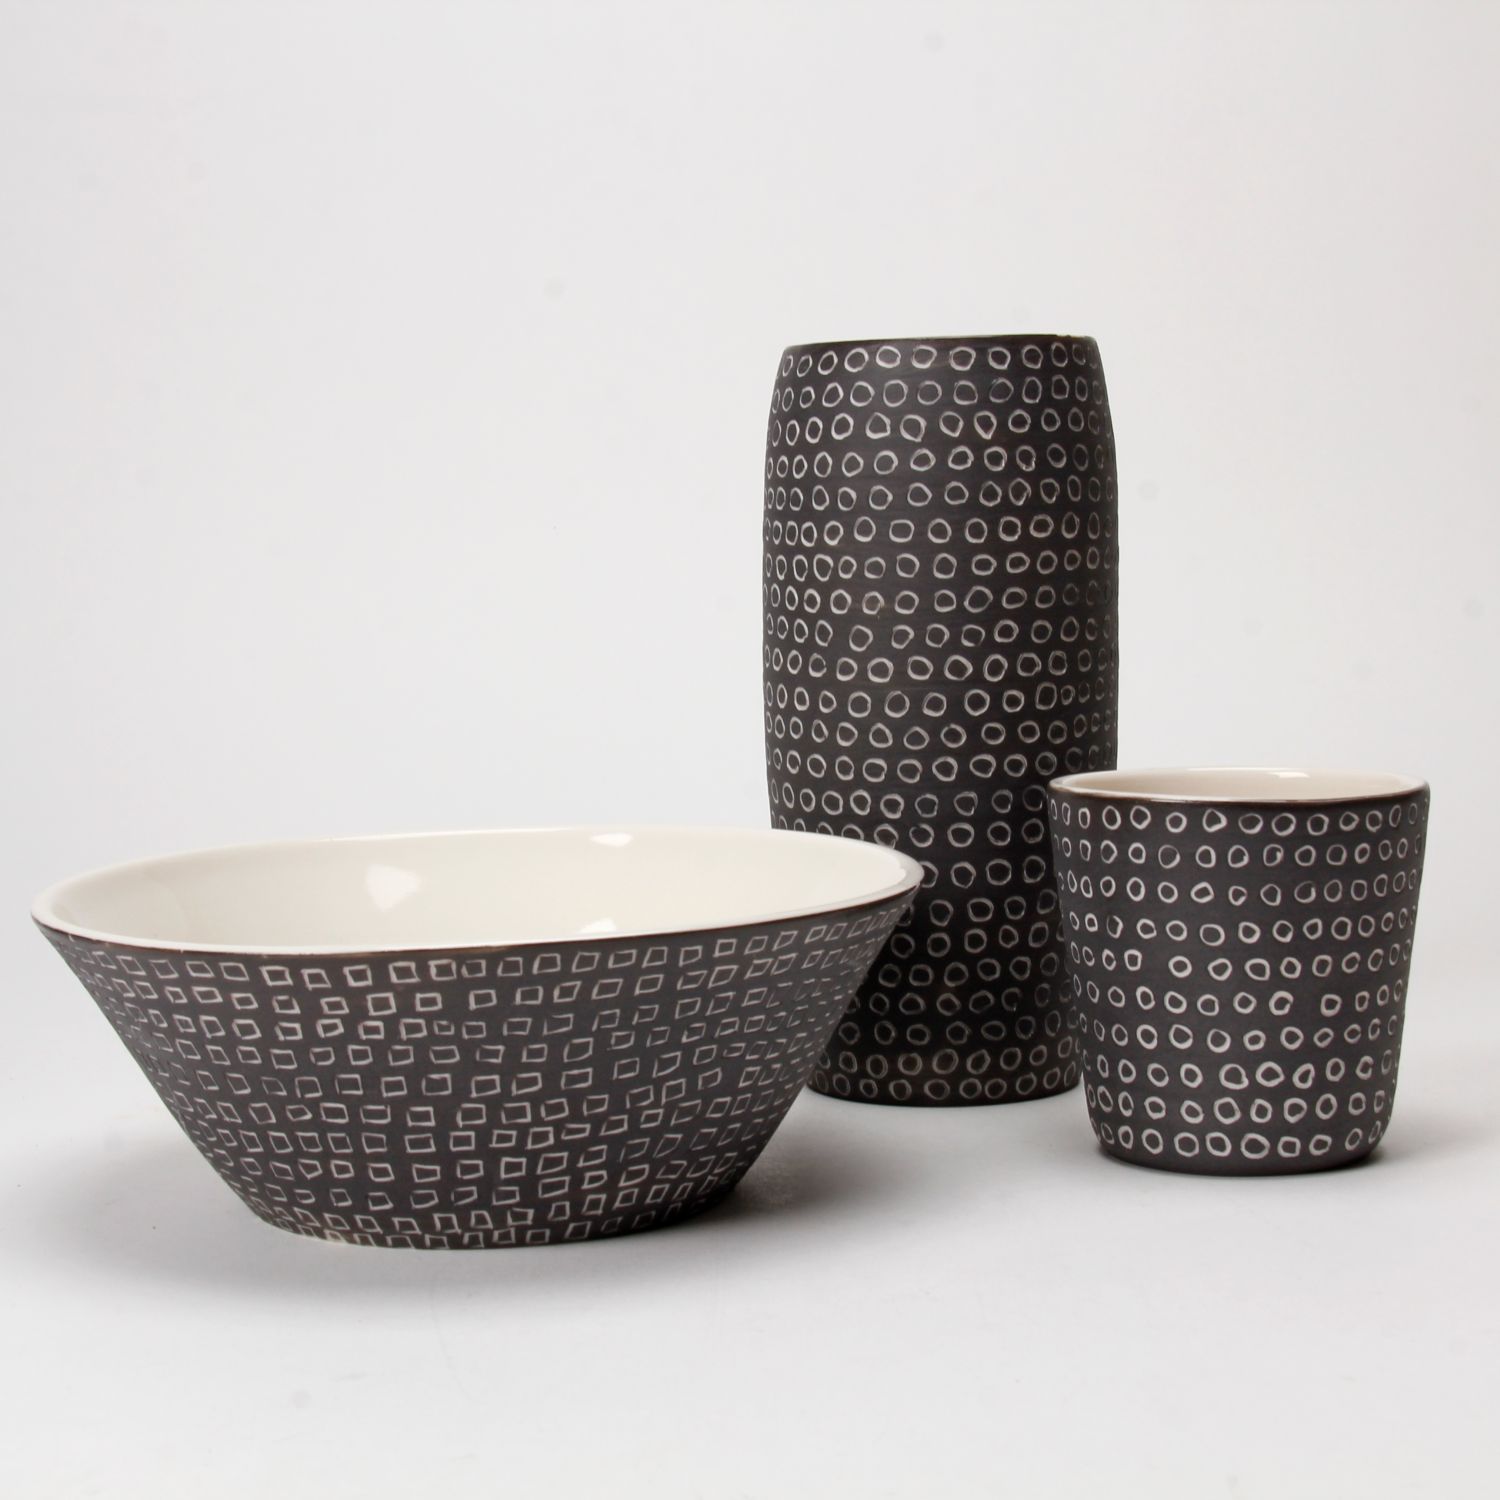 Cuir Ceramics: Black and White Vase Product Image 2 of 5